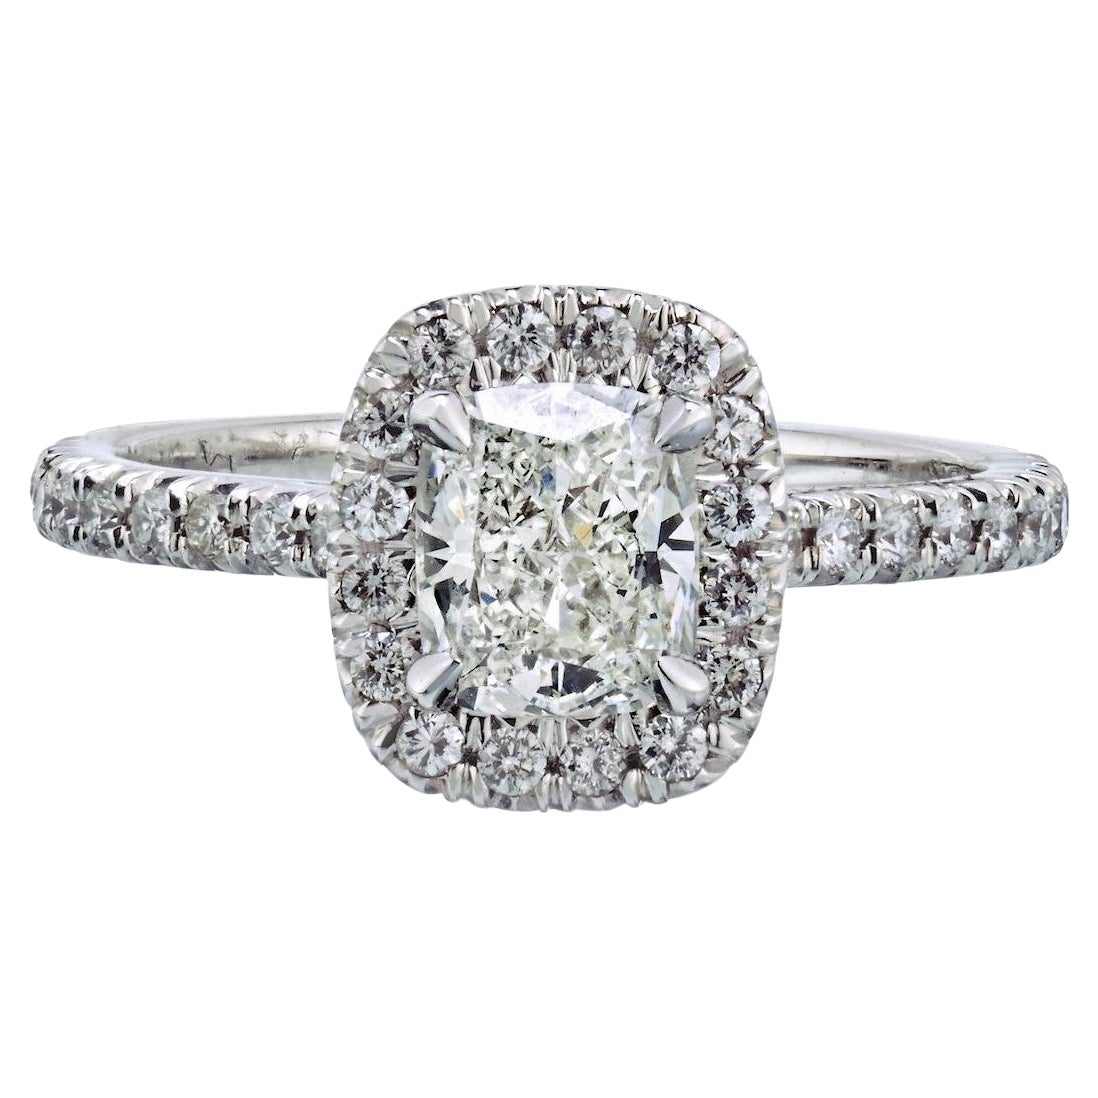 Engagement Cushion Cut Diamond Halo Ring 18K White Gold 1.06Cttw For Sale